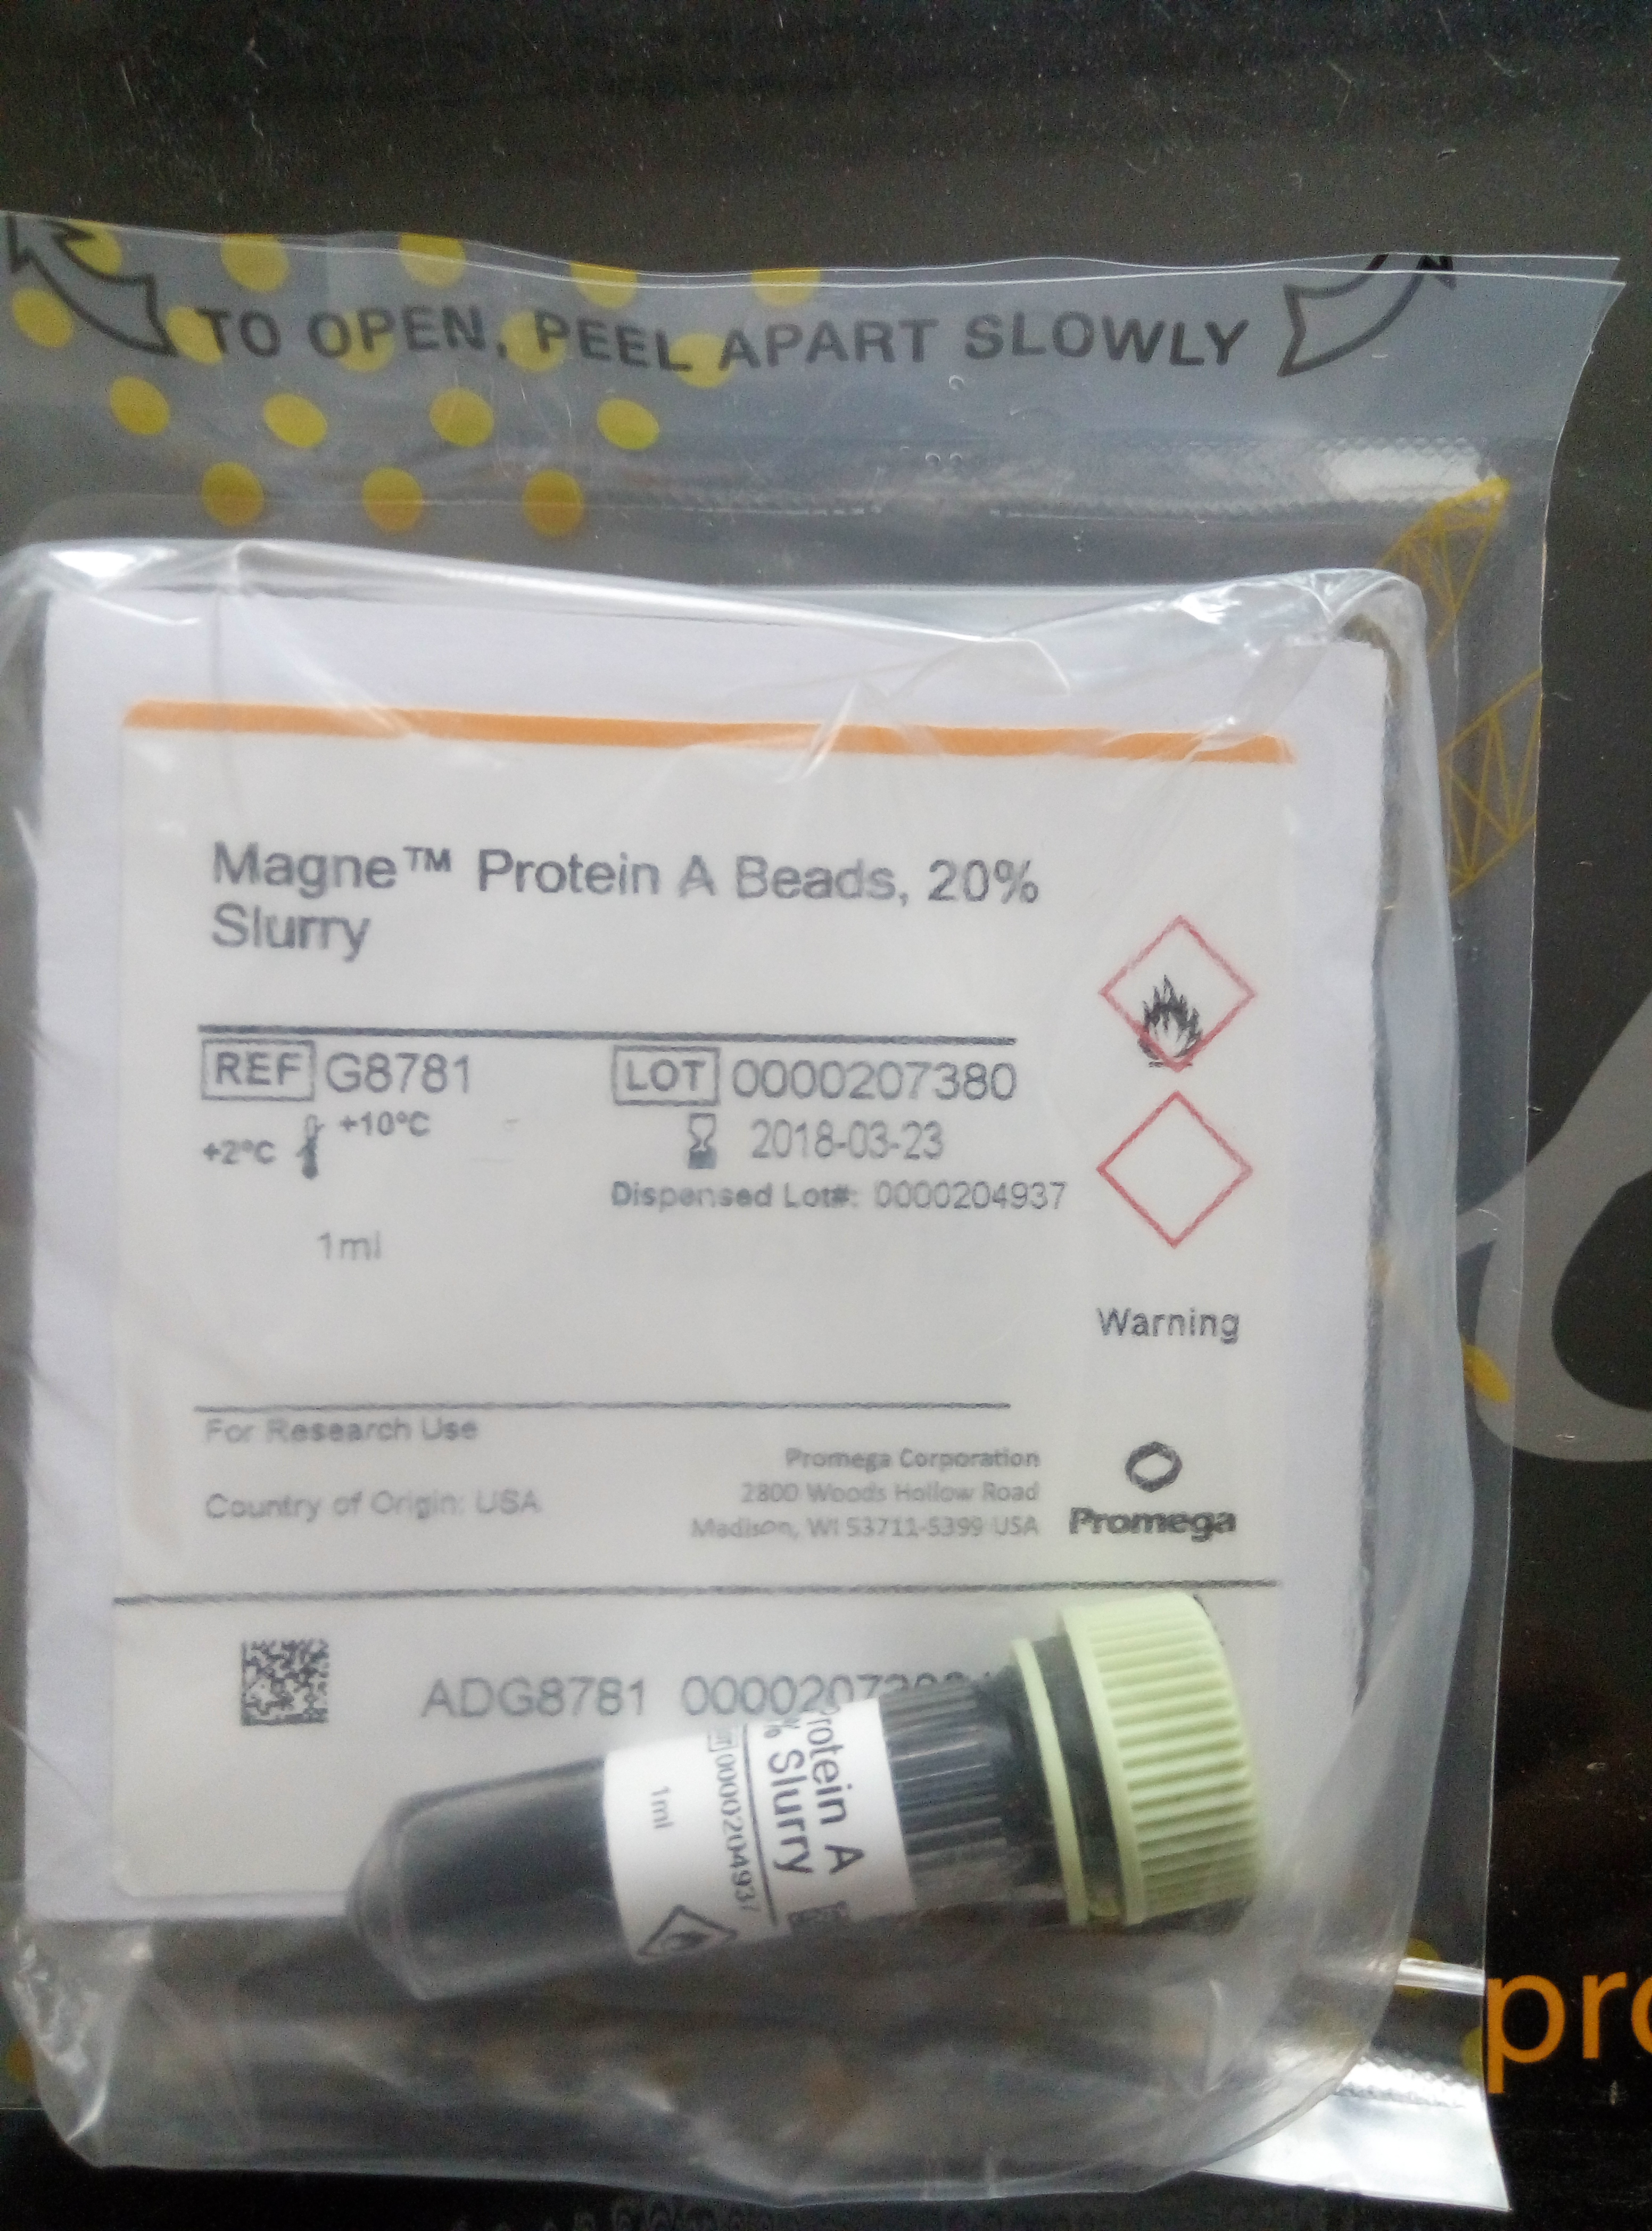 Magne™ Protein A Beads